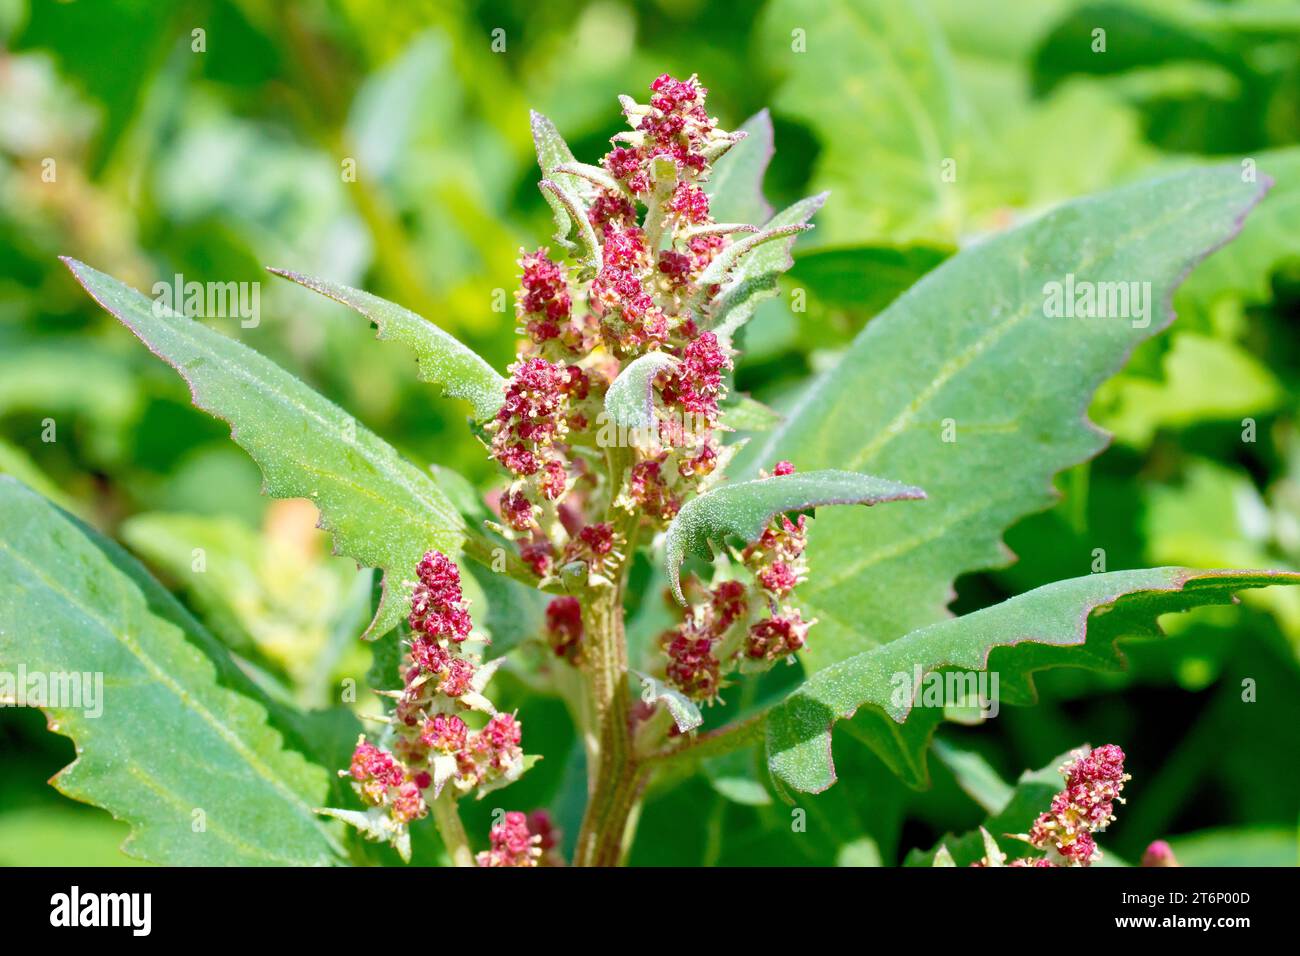 Spear-leaved Orache (atriplex prostrata), close up showing the tiny insignificant flowers of the plant, found growing around the coasts of the UK. Stock Photo